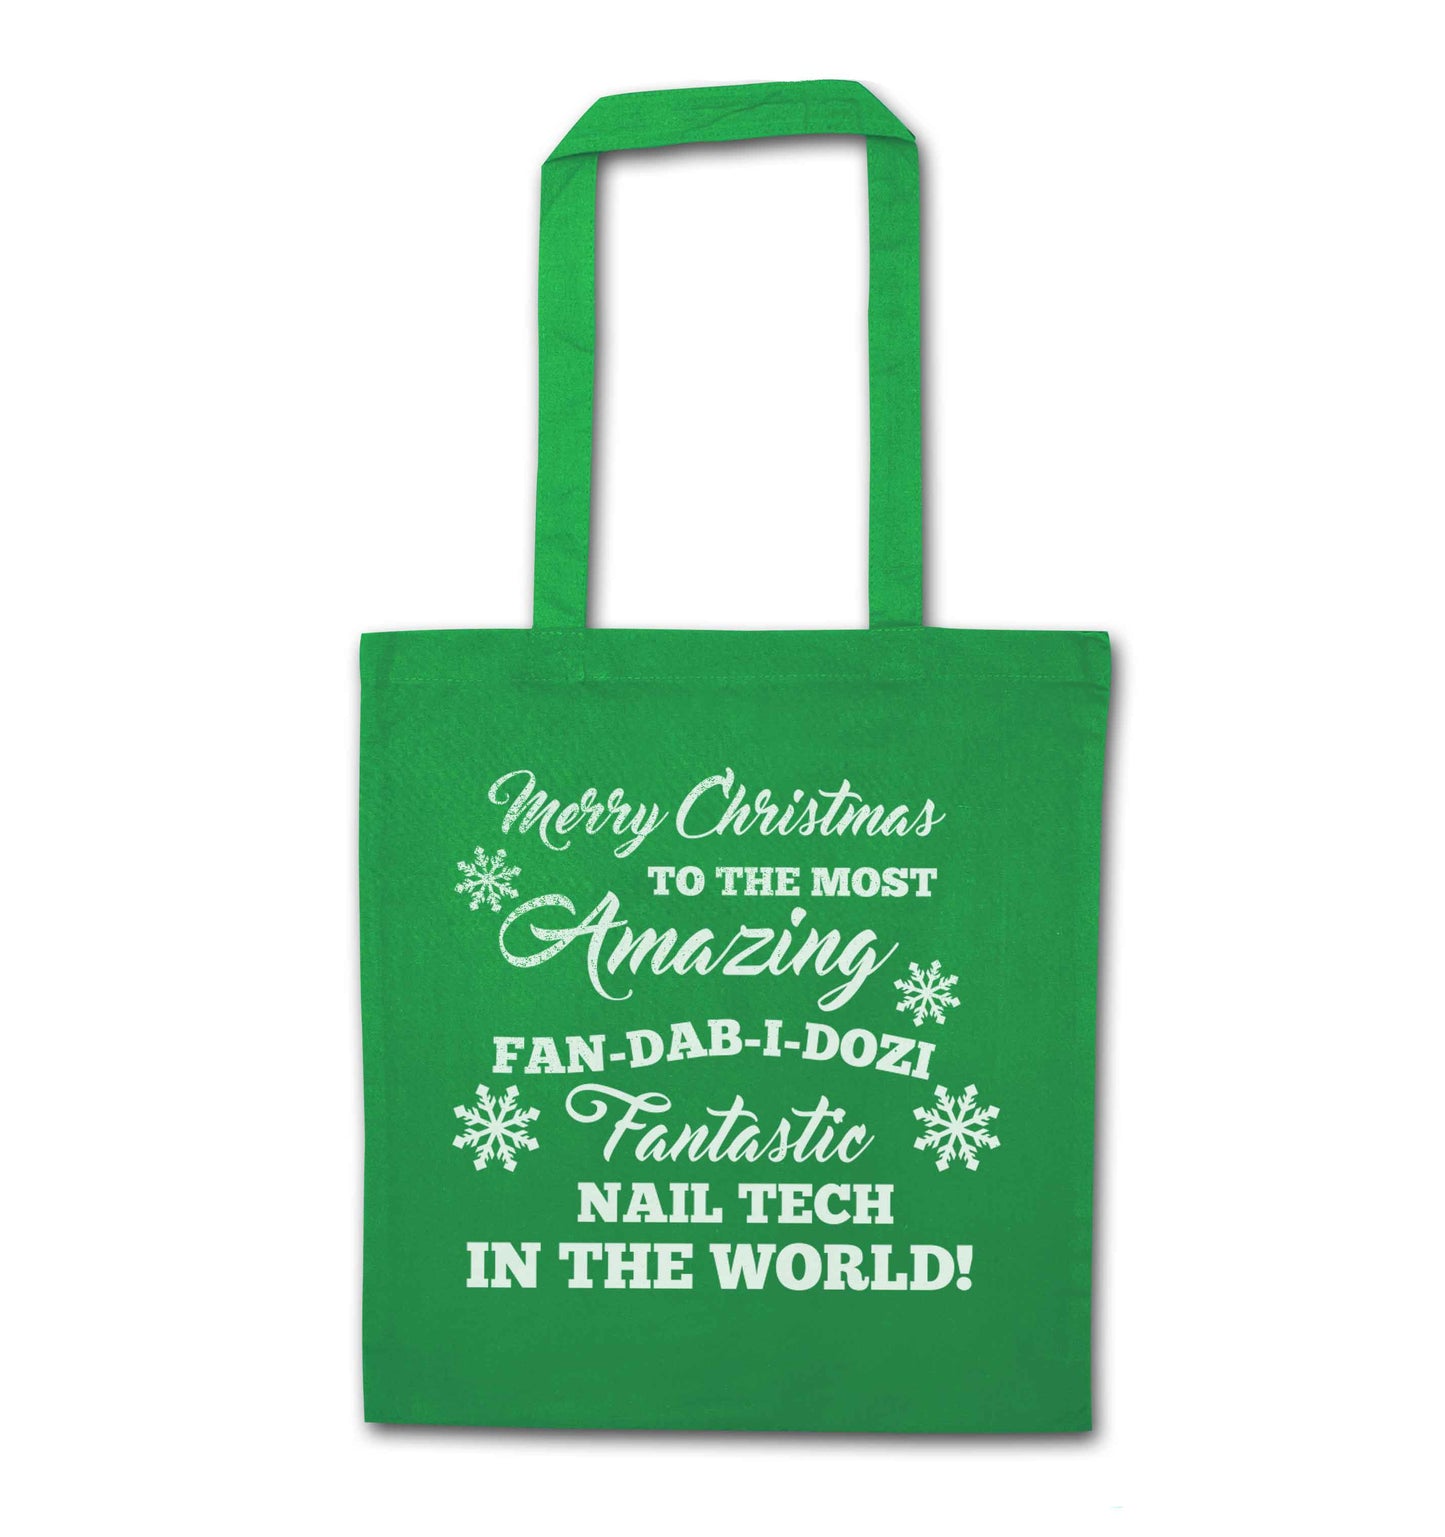 Merry Christmas to the most amazing fan-dab-i-dozi fantasic nail technician in the world green tote bag